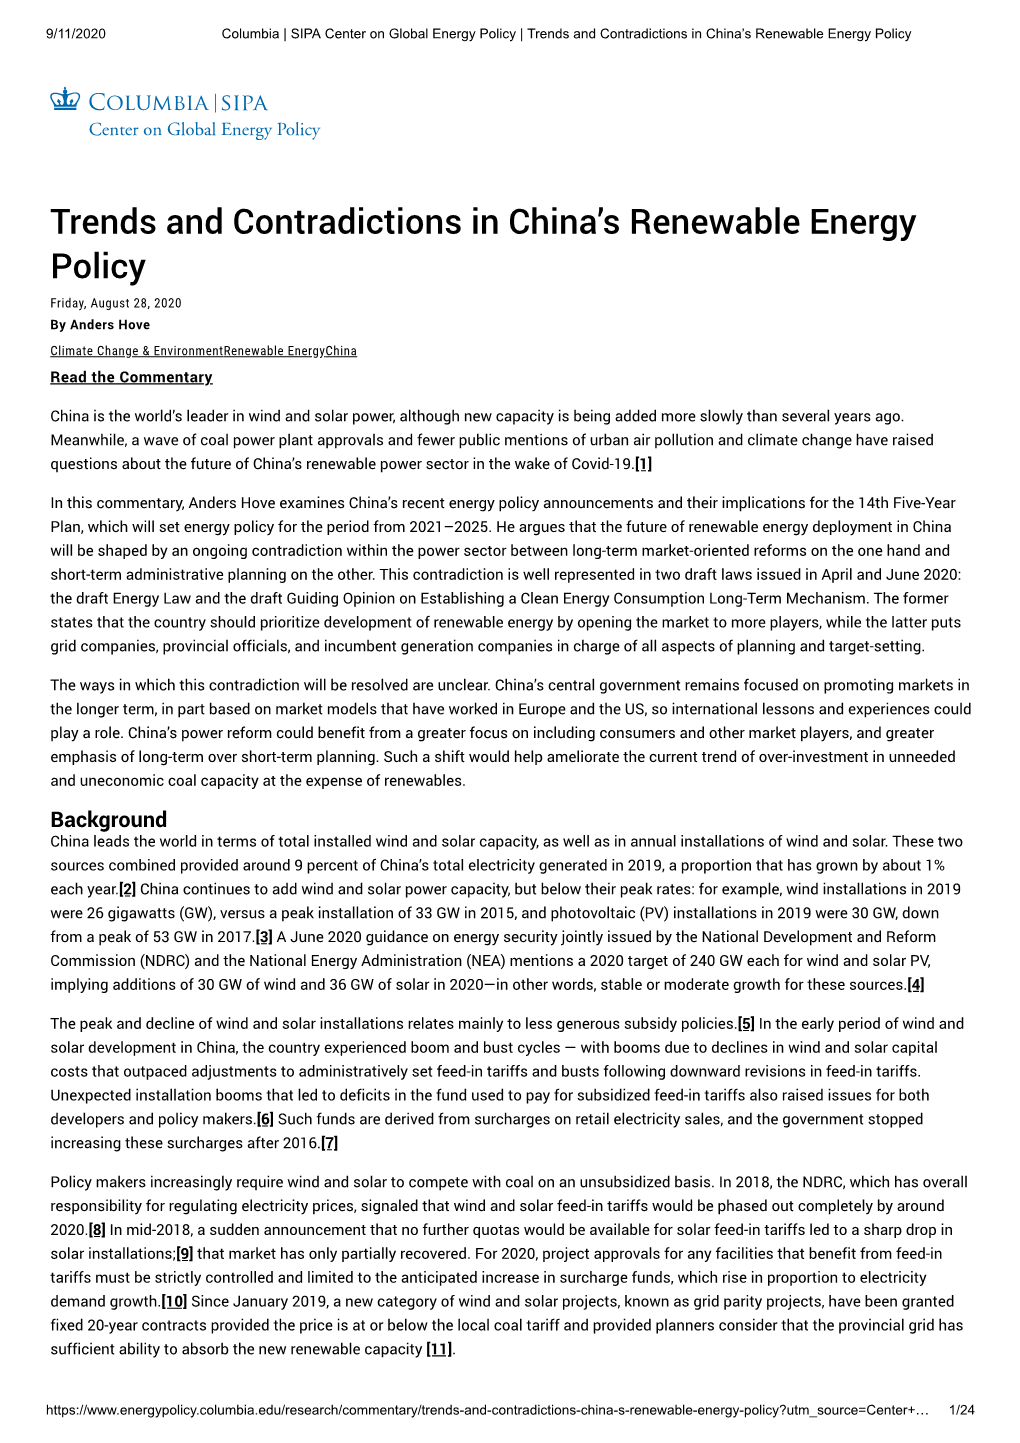 Trends and Contradictions in China's Renewable Energy Policy